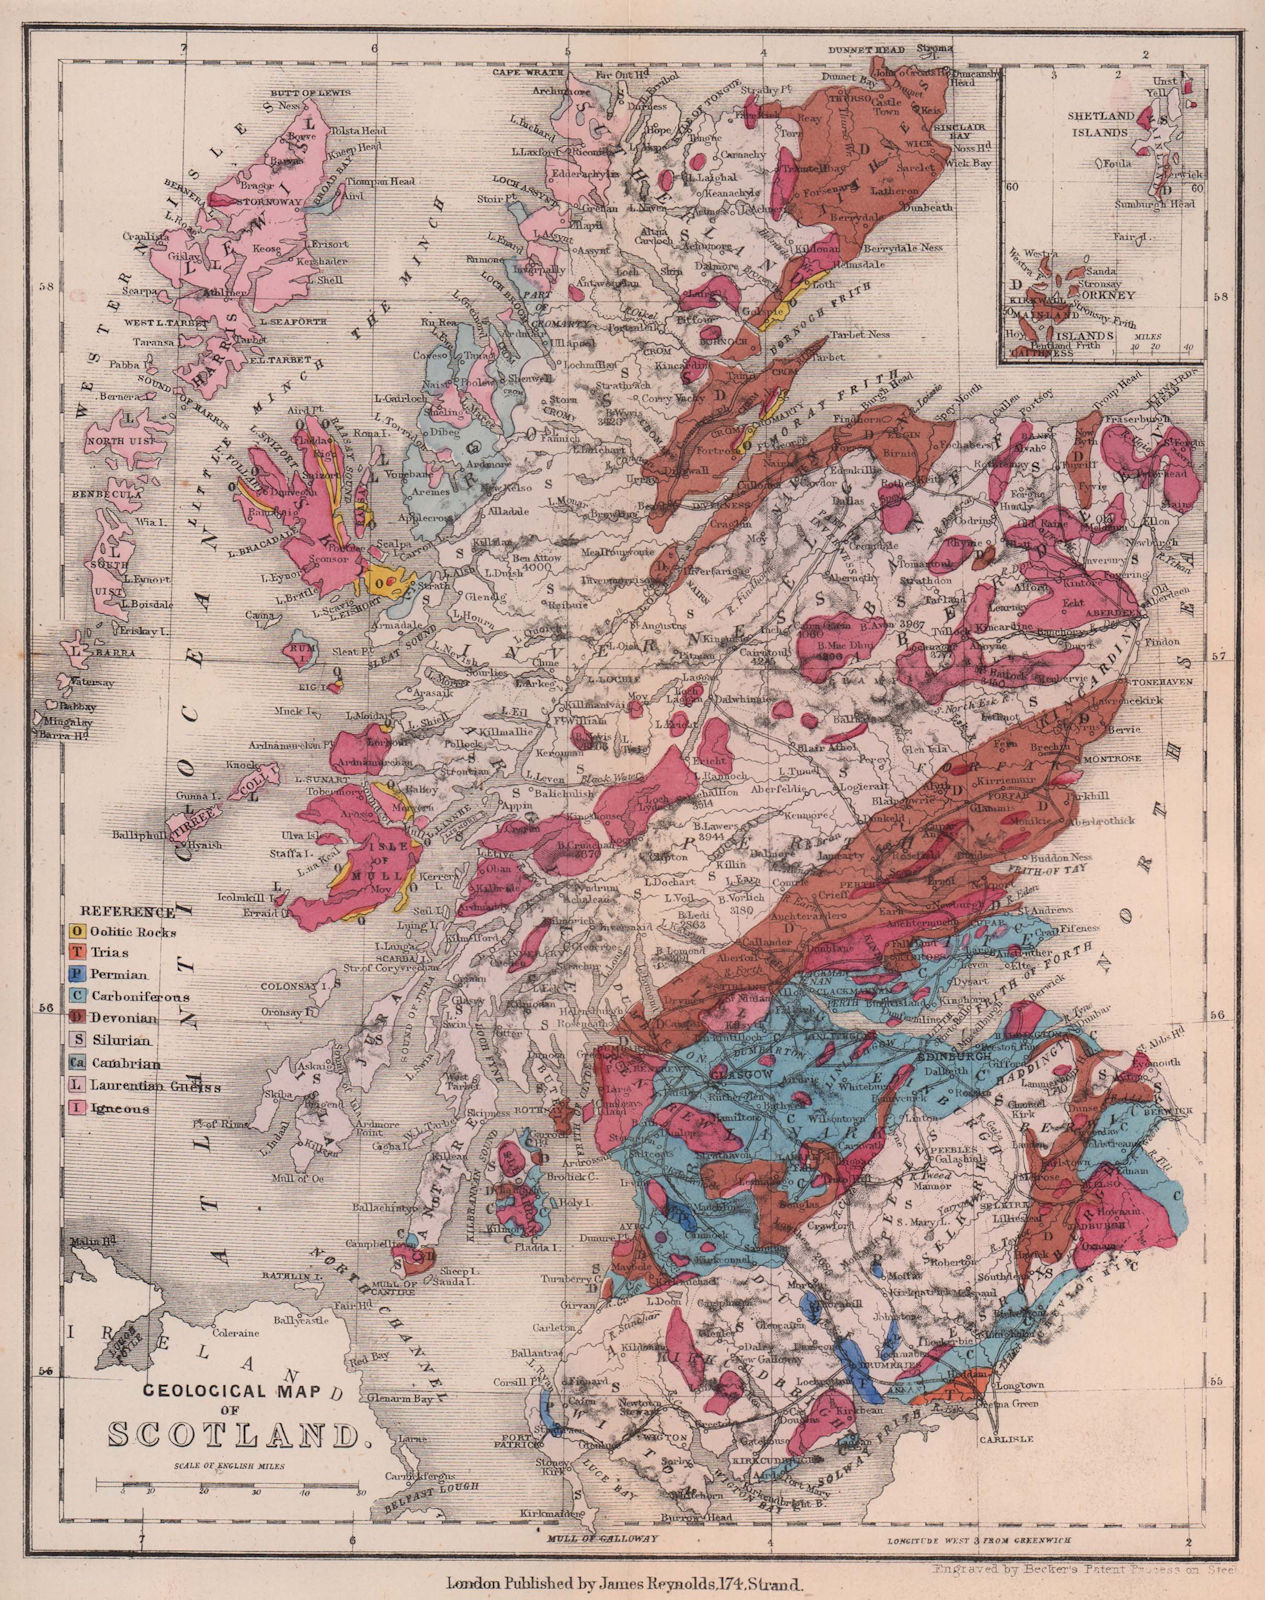 Antique geological map of Scotland by James Reynolds 1864